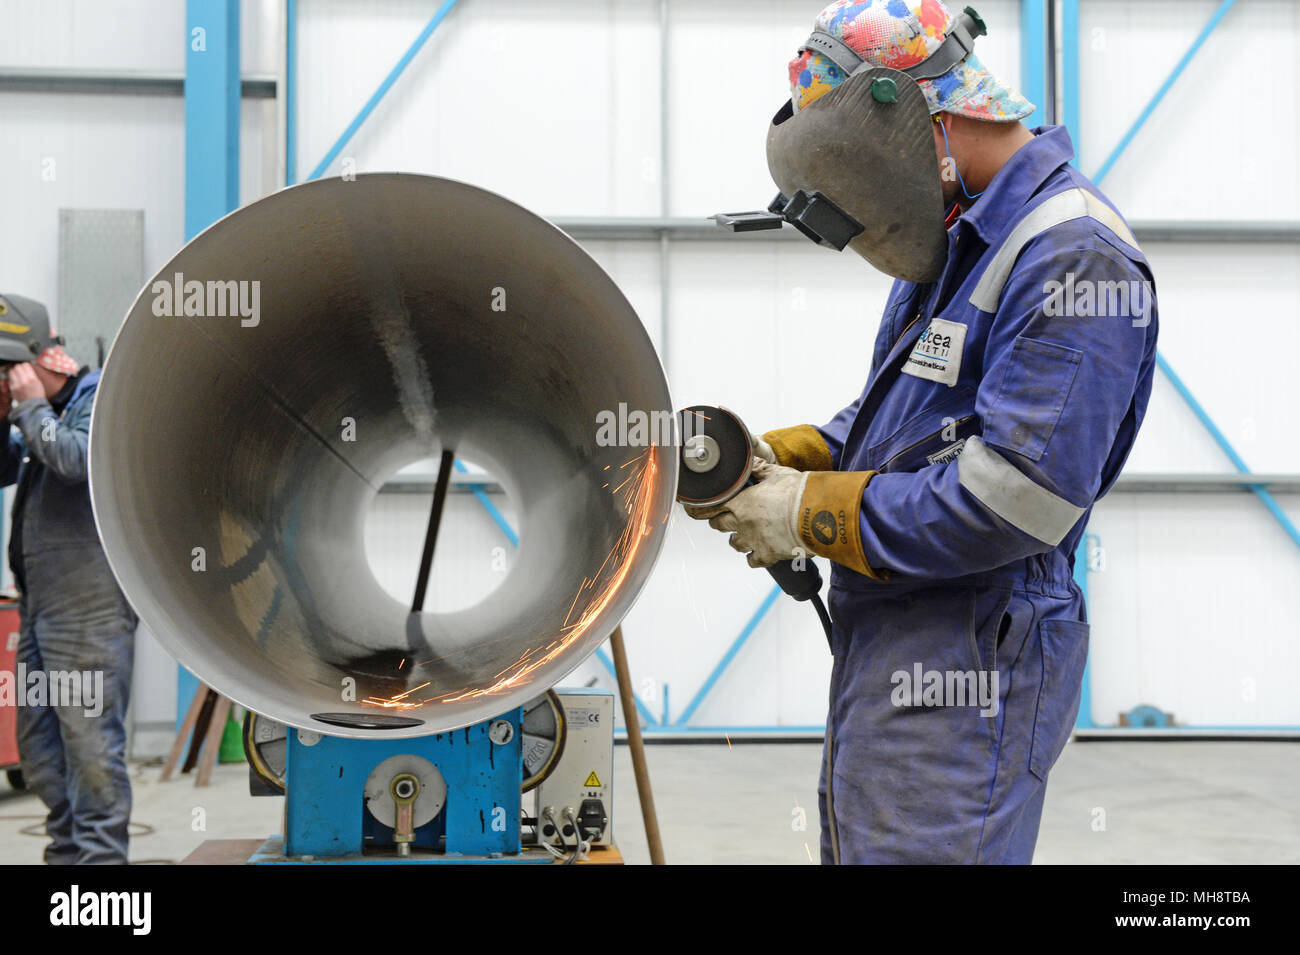 Man cutting large pipe with grinder in engineering workshop Stock Photo